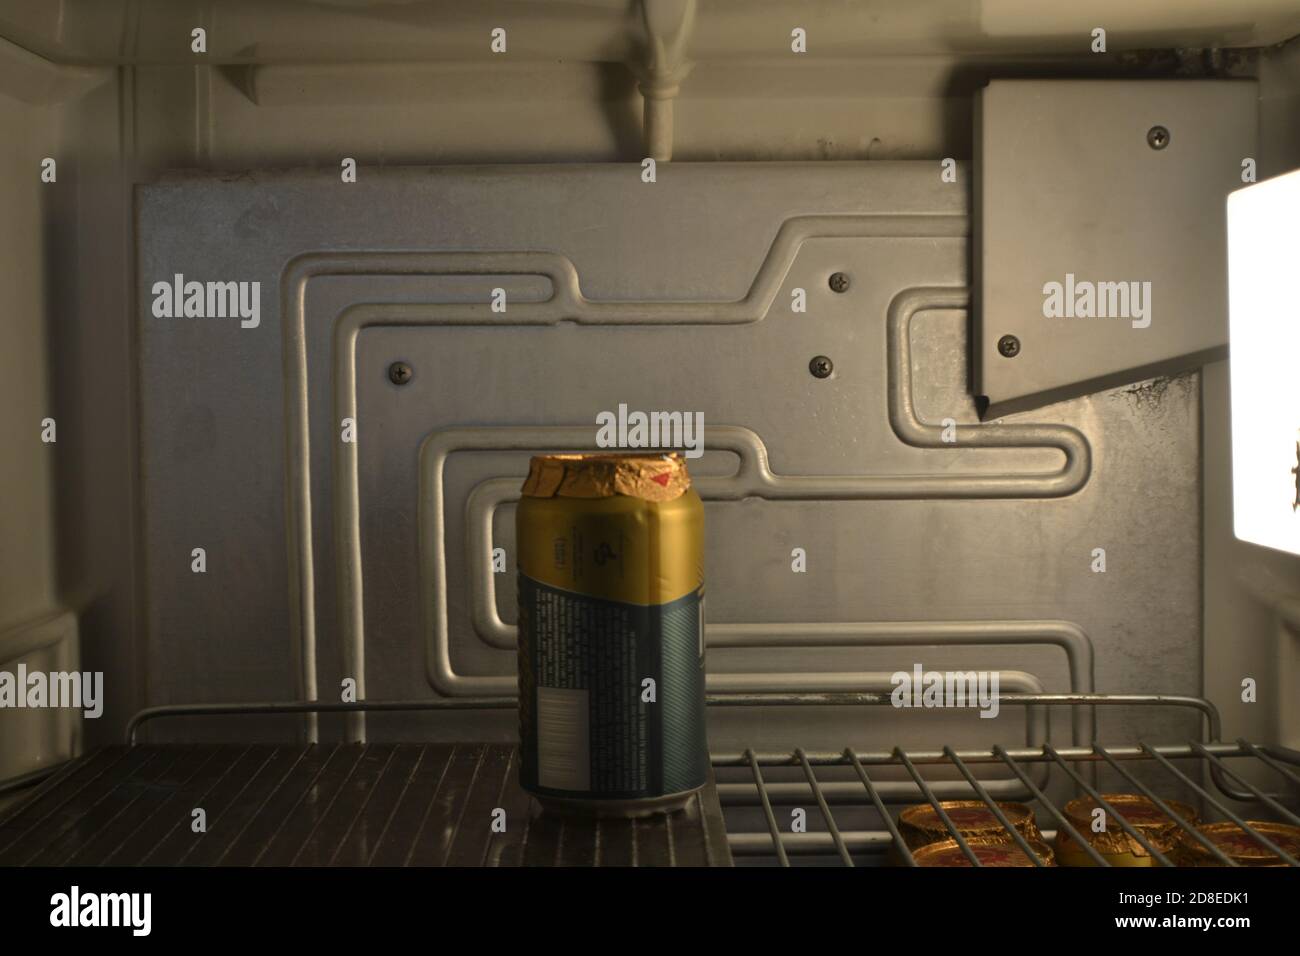 Beer in the refrigerator, open vintage refrigerator showing the inside with internal light and shelf with cold beer can Stock Photo